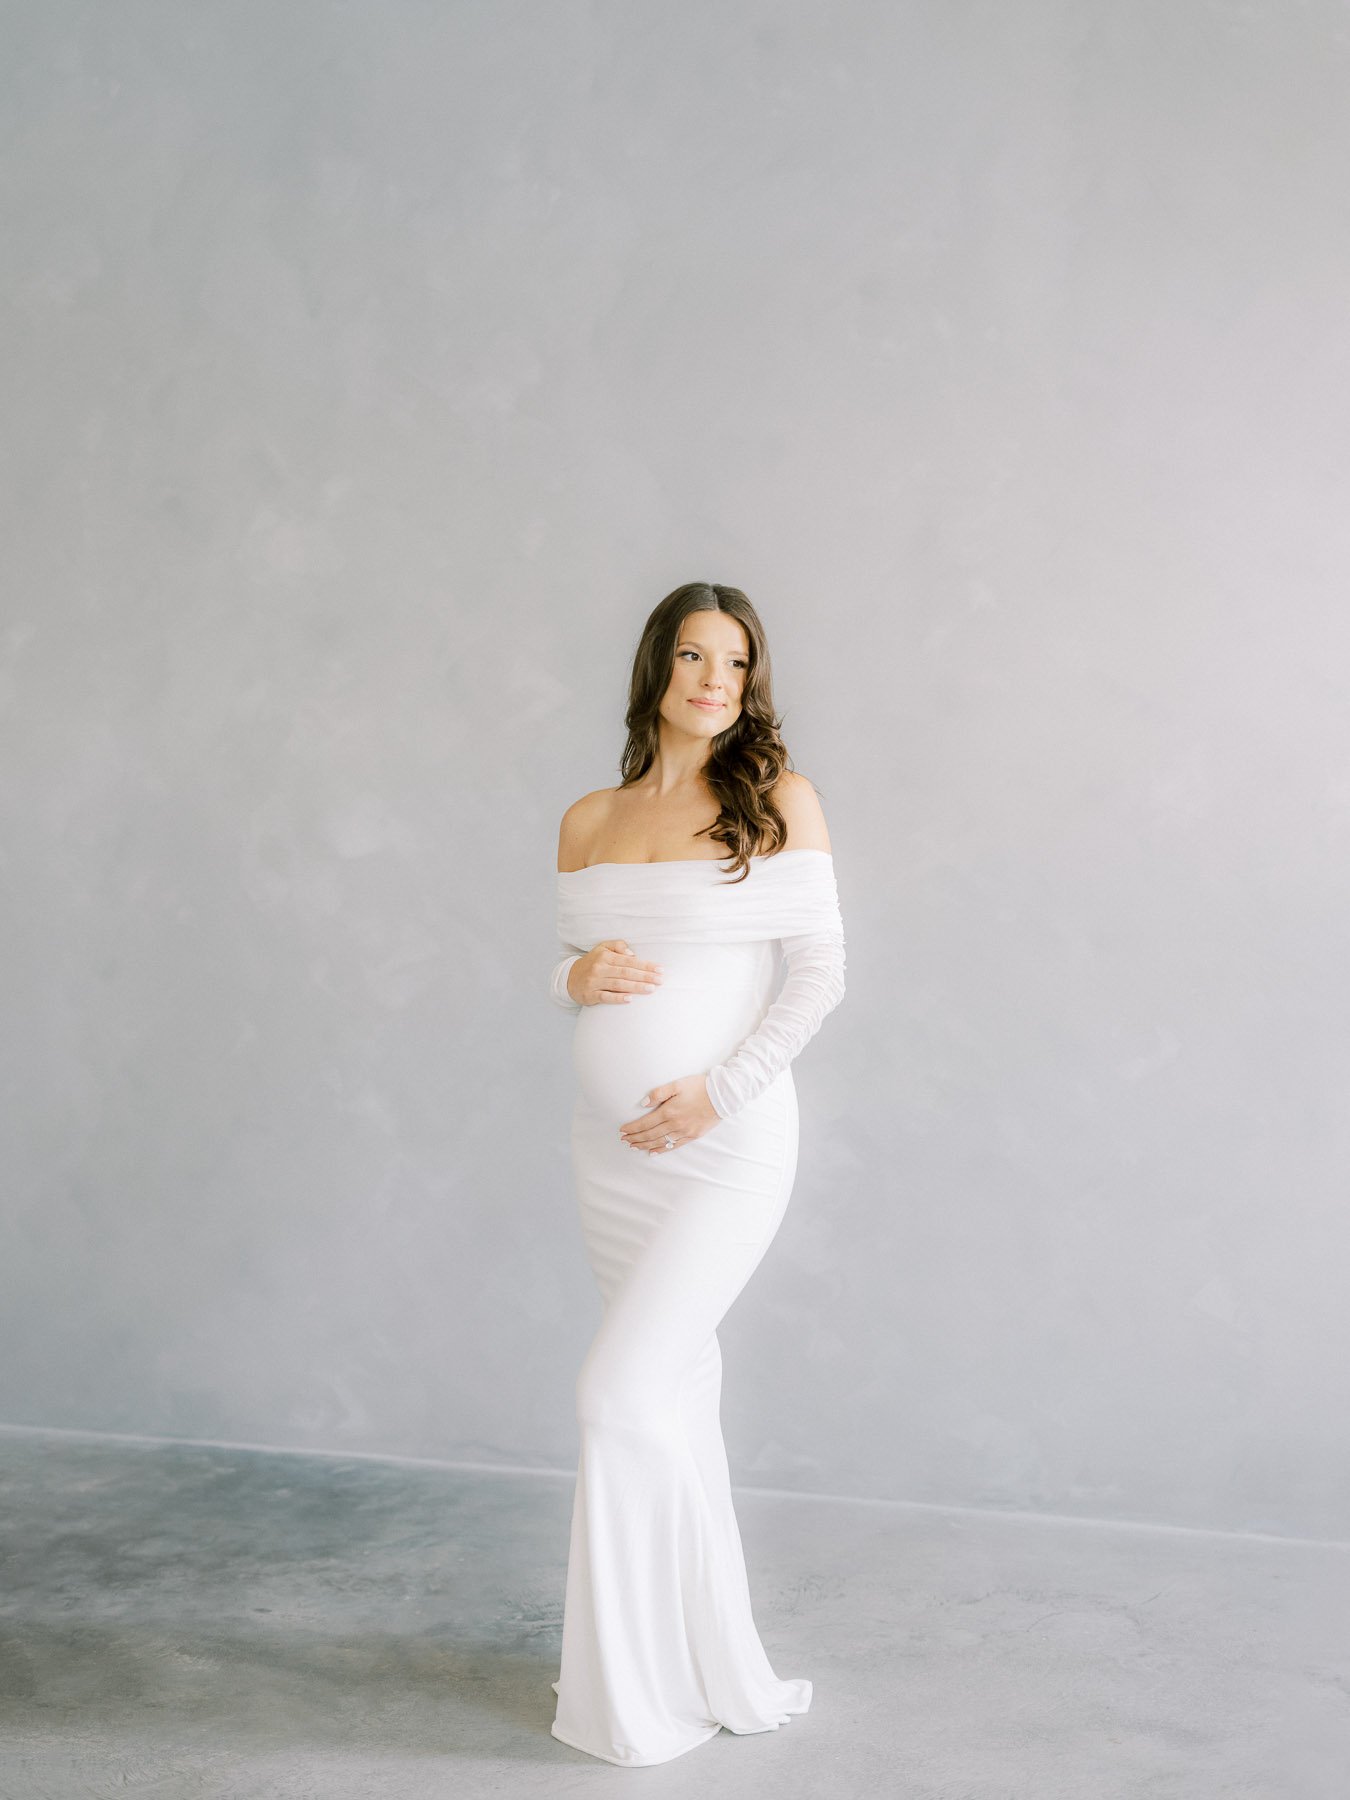 Simeone Maternity by Michelle Lange Photography-6.jpg